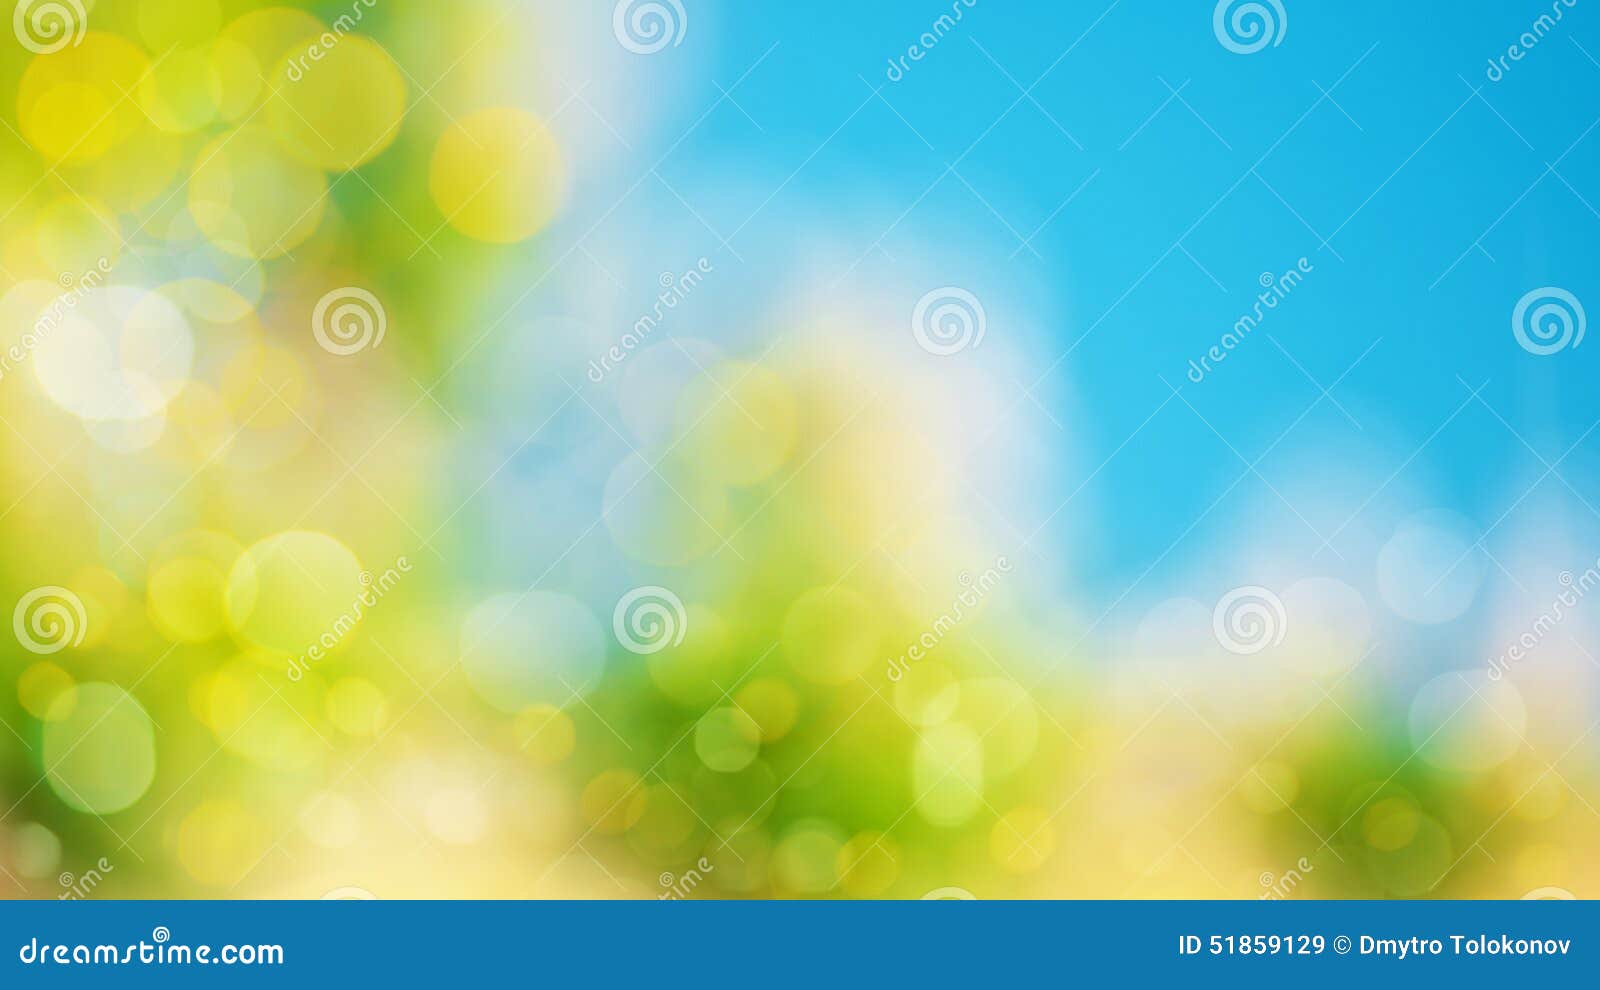 abstract natural backgrounds